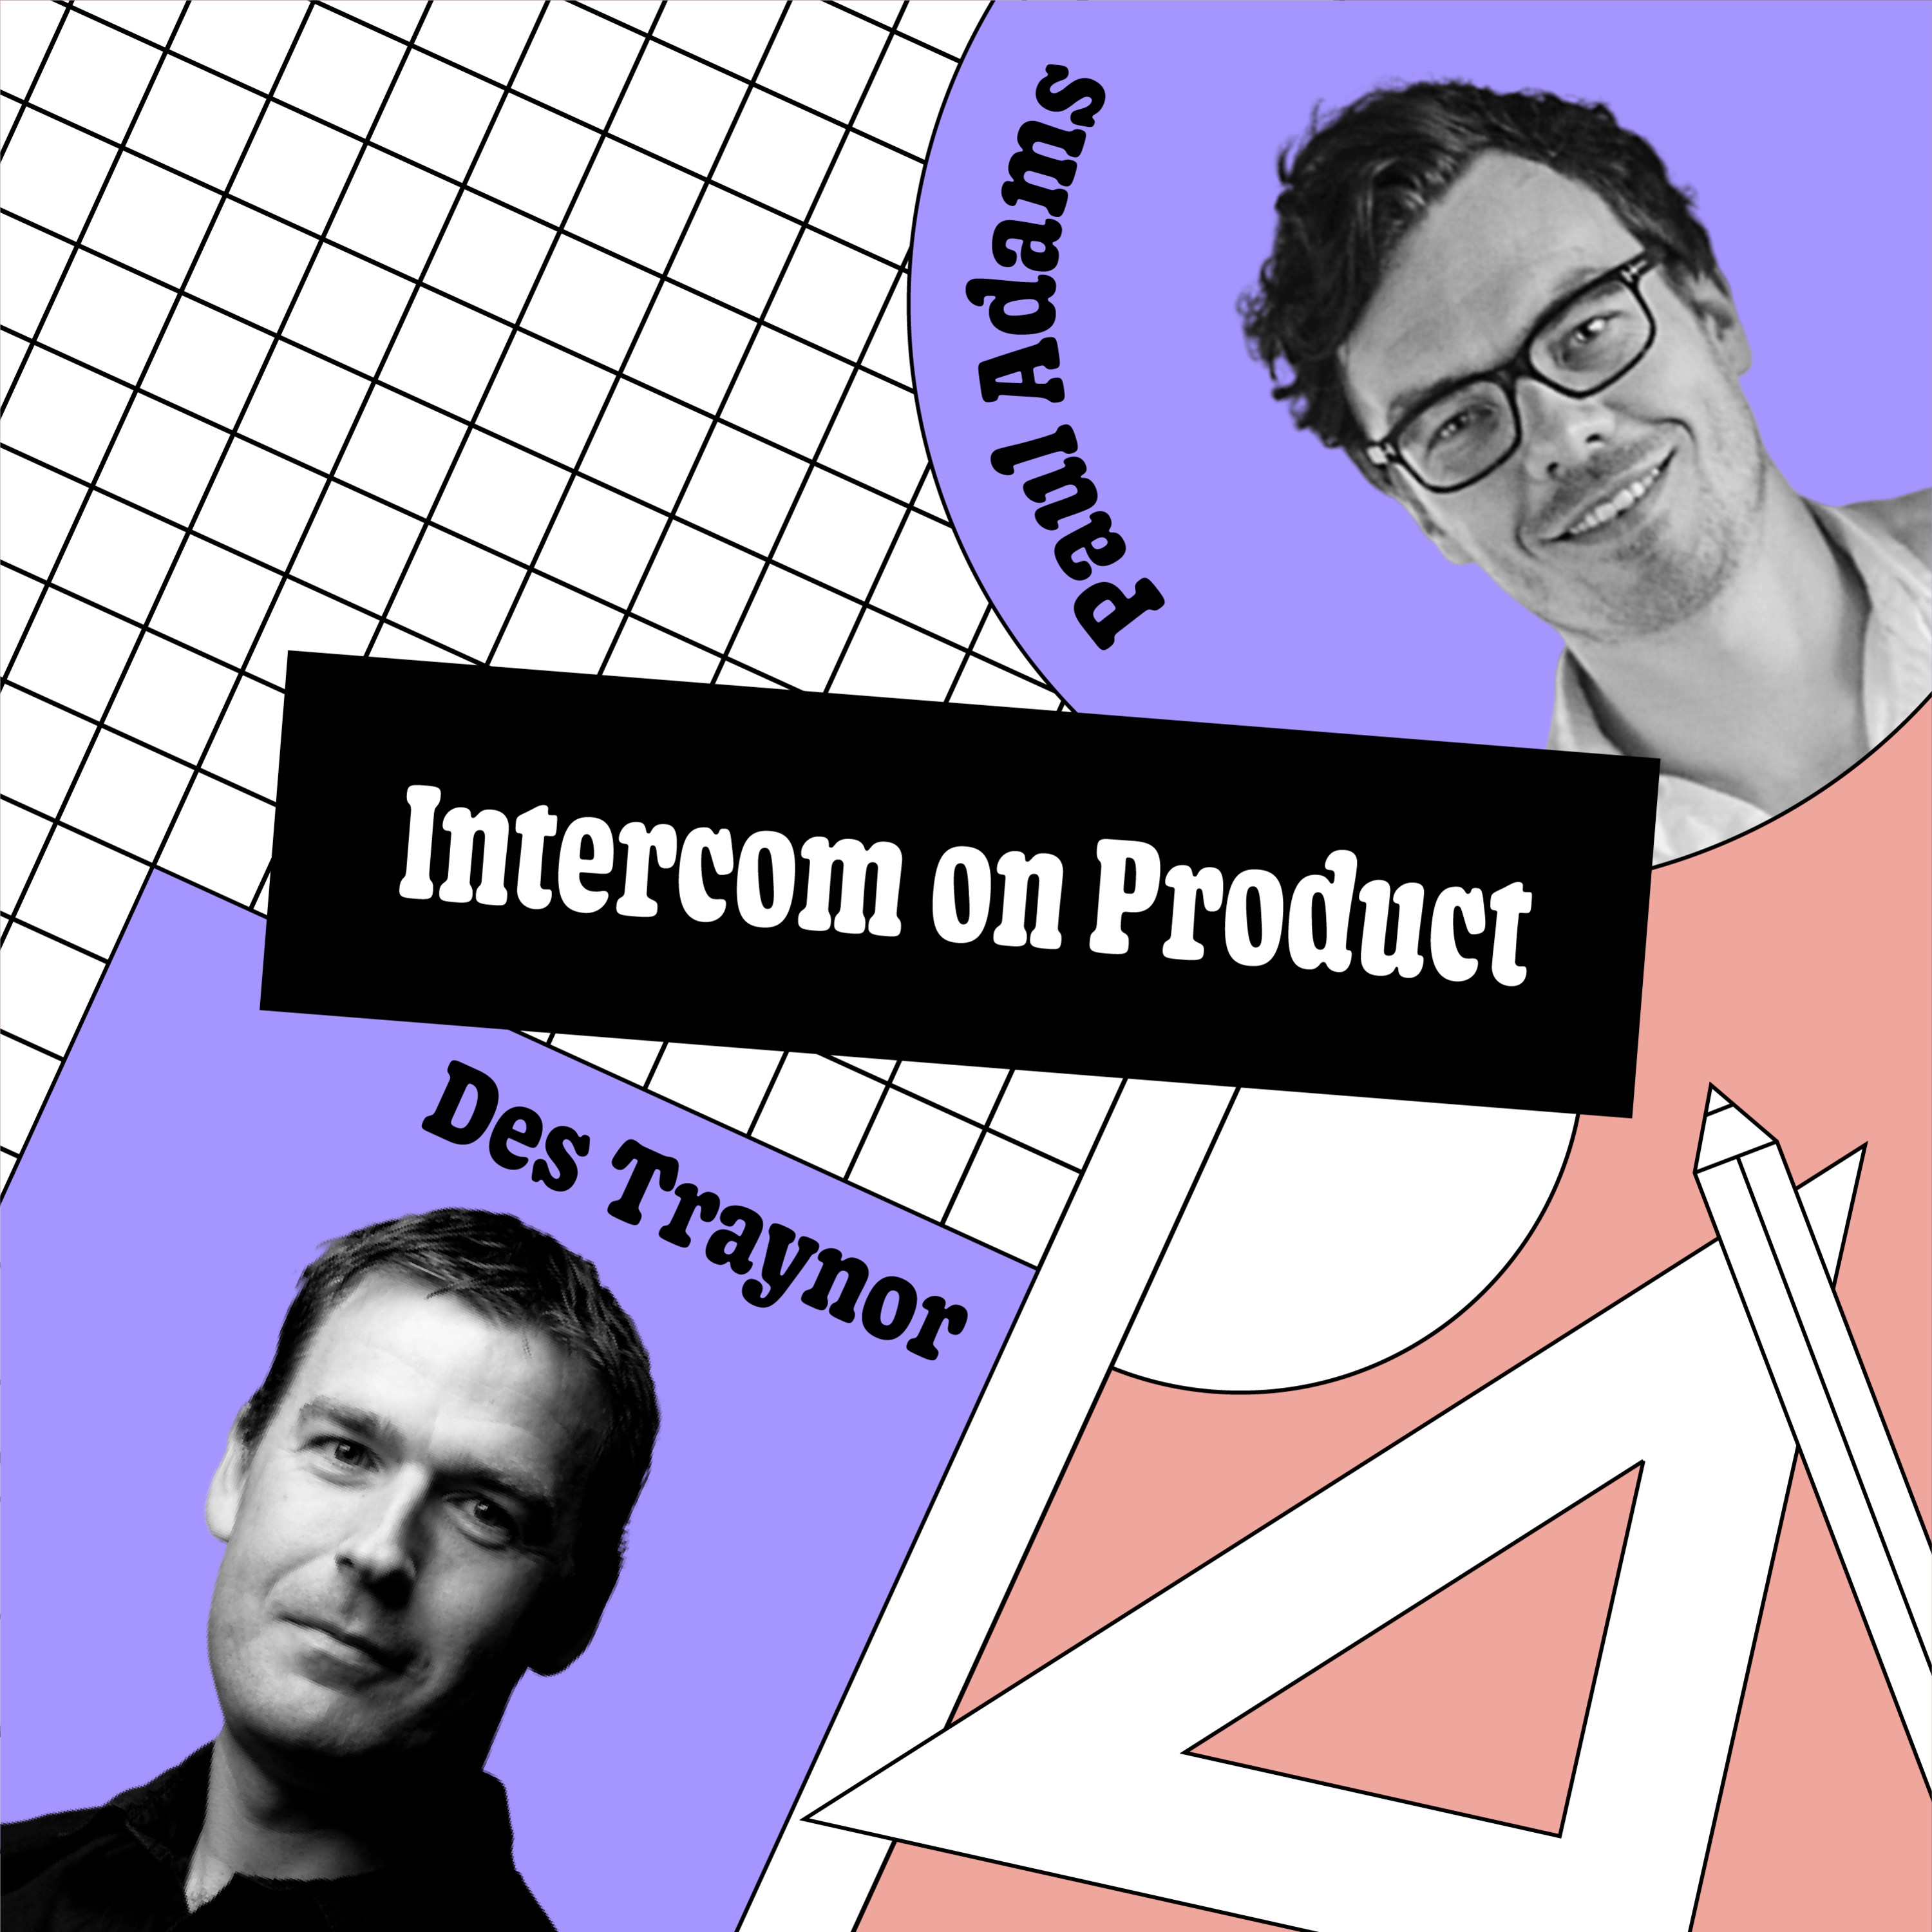 Intercom on Product: Meet your marketer